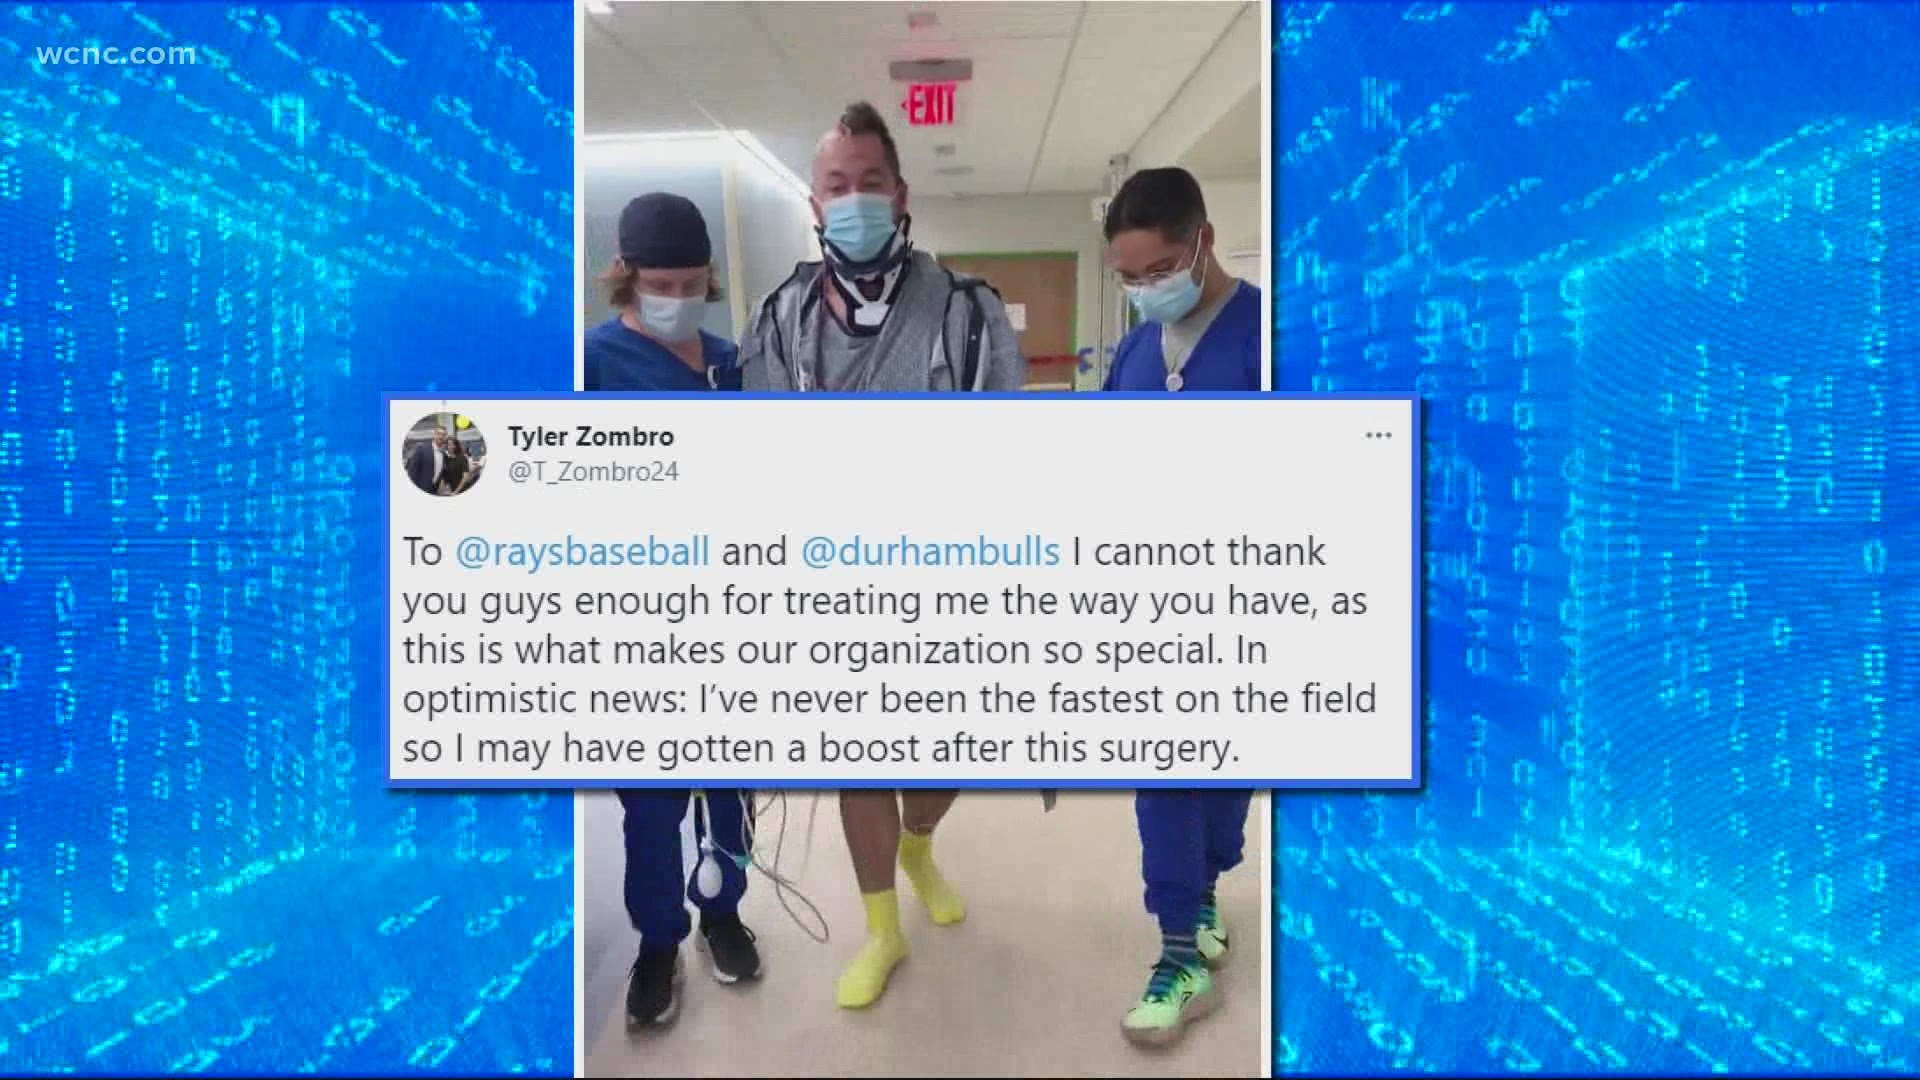 Durham Bulls pitcher shares update on recovery, 2weeks after hit wcnc